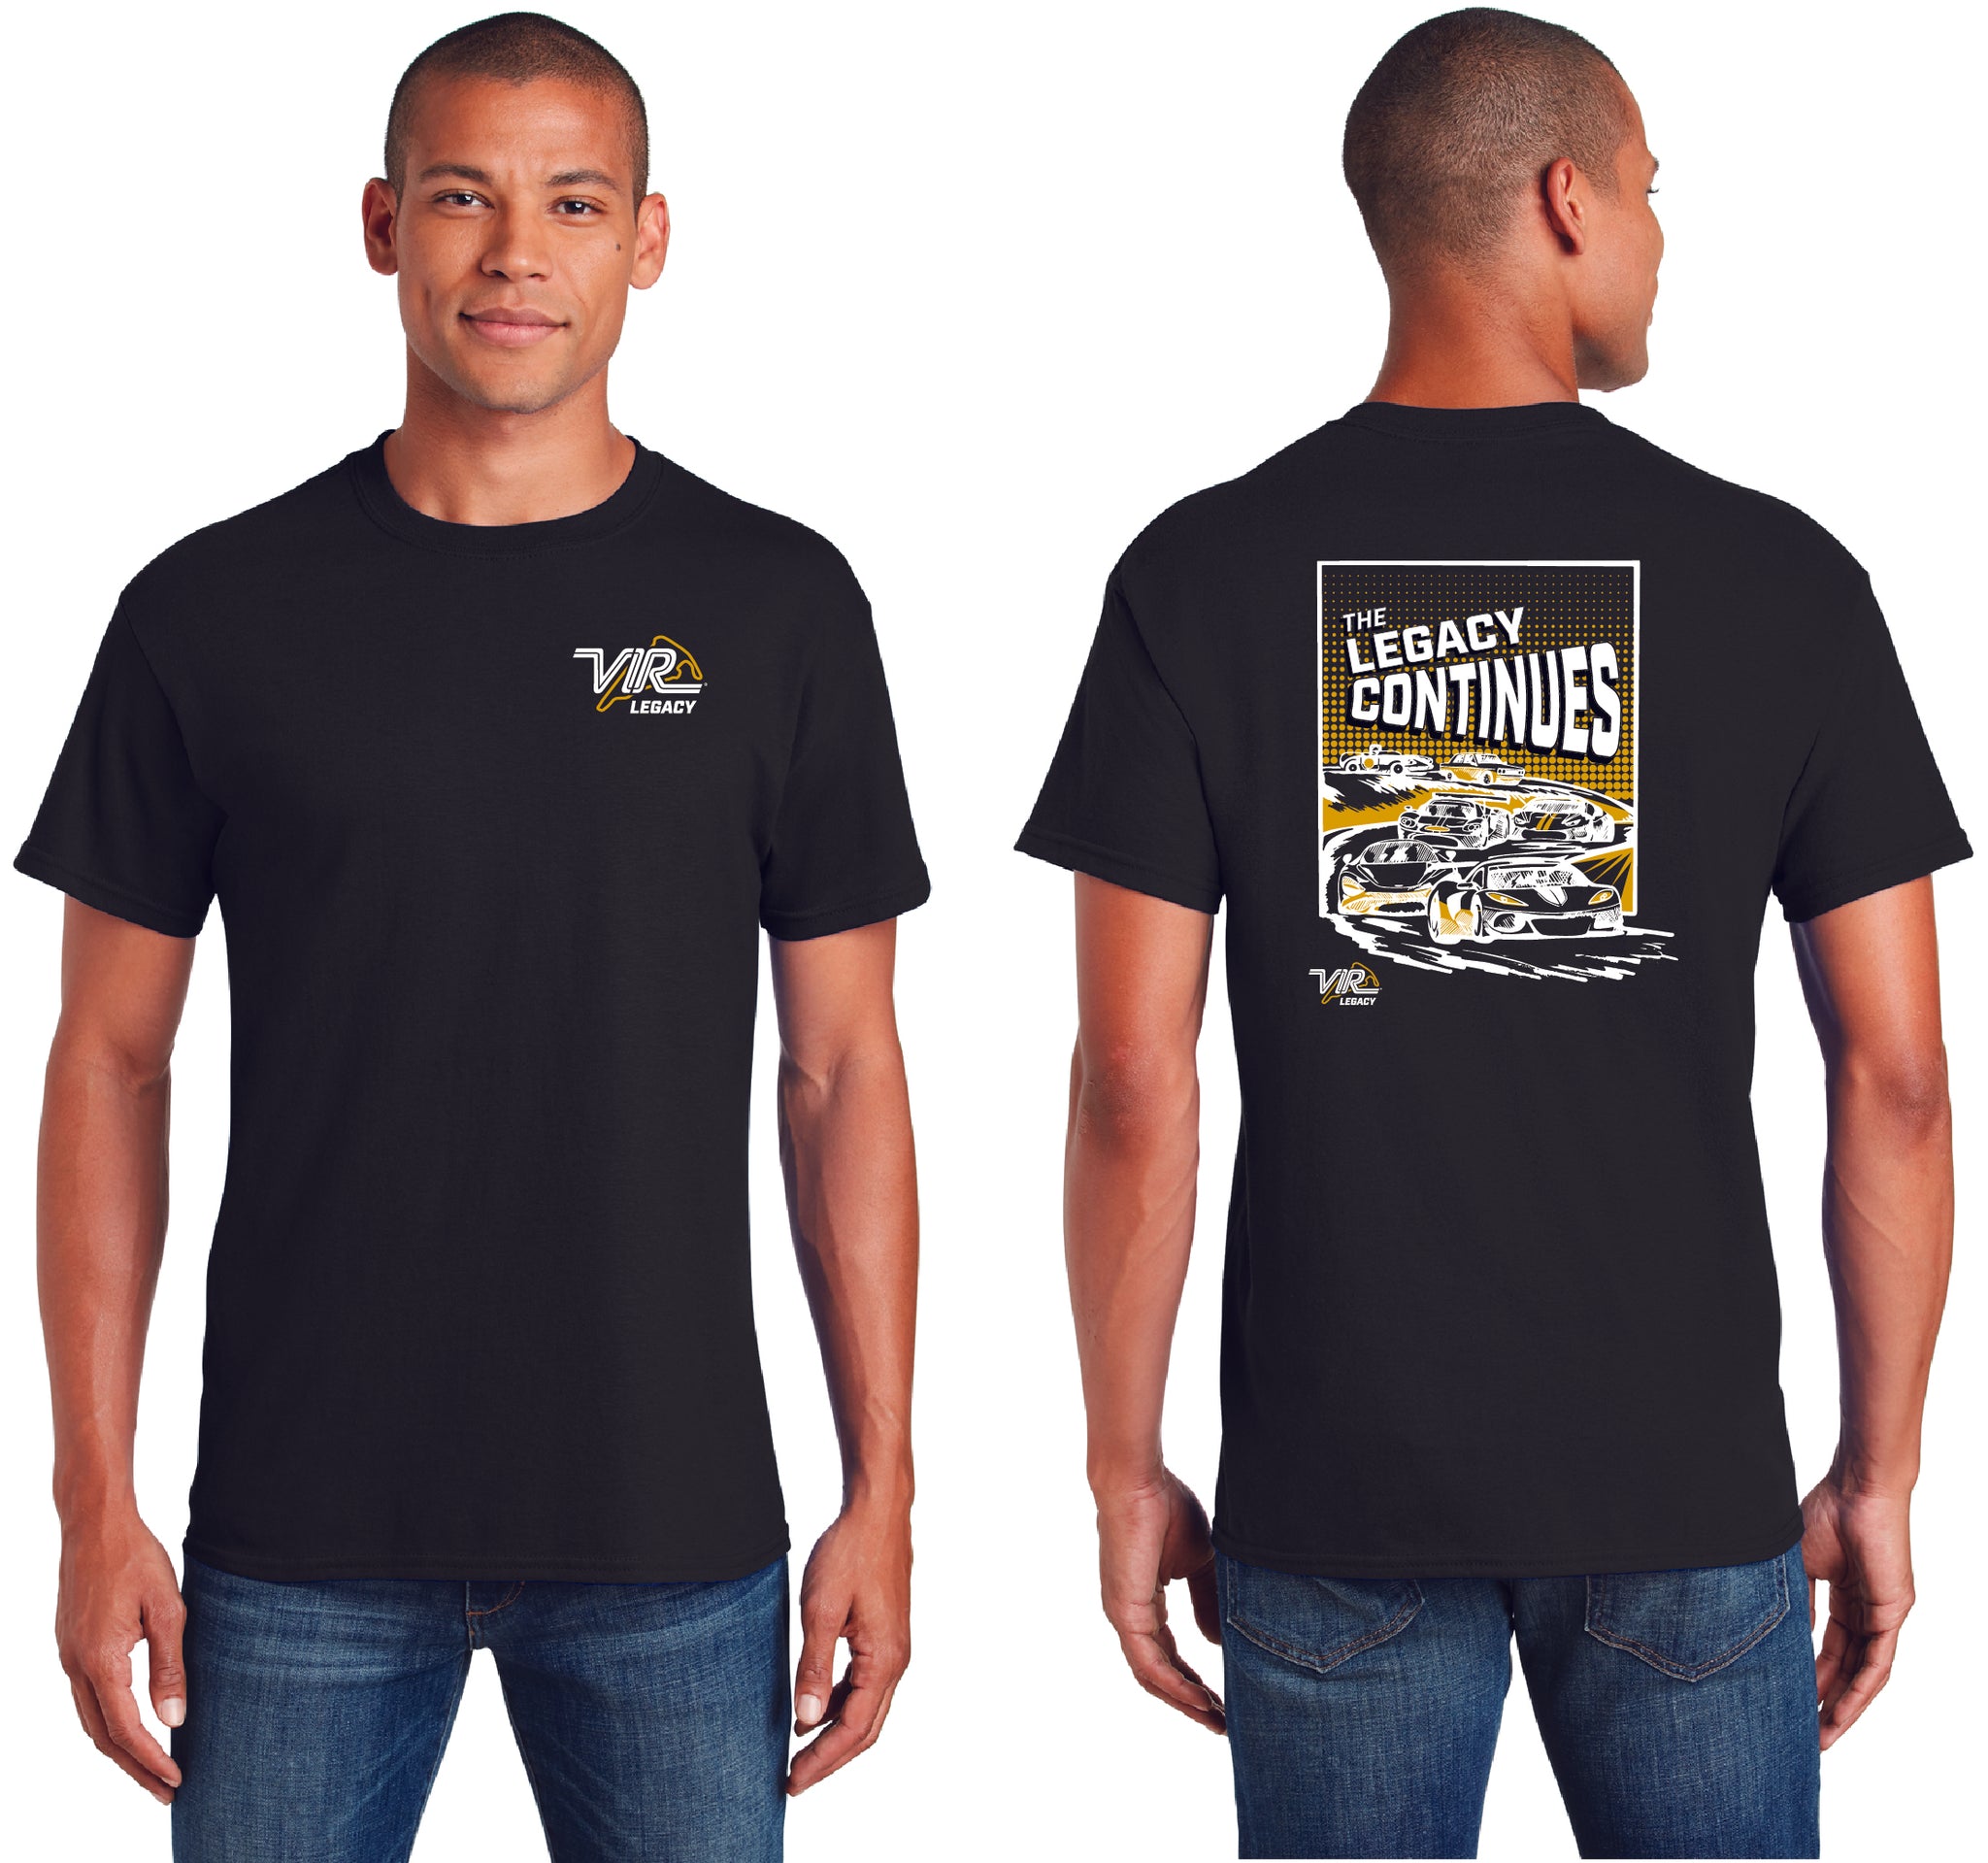 VIR Legacy Continues Tee, Color: Black (Size: S-3XL)